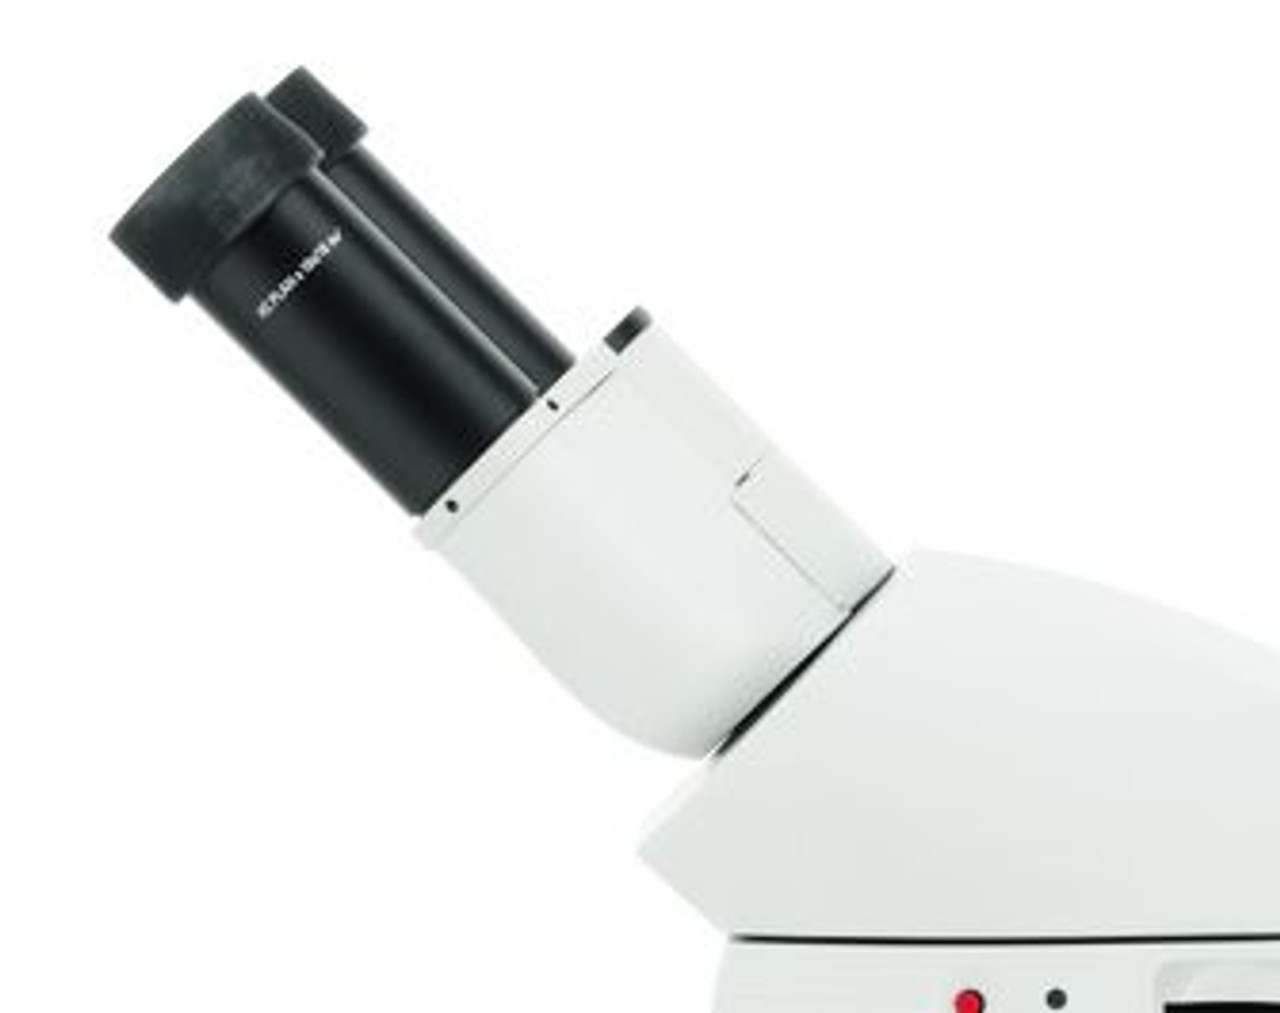 Leica DM500 EZTube™ with preset diopter